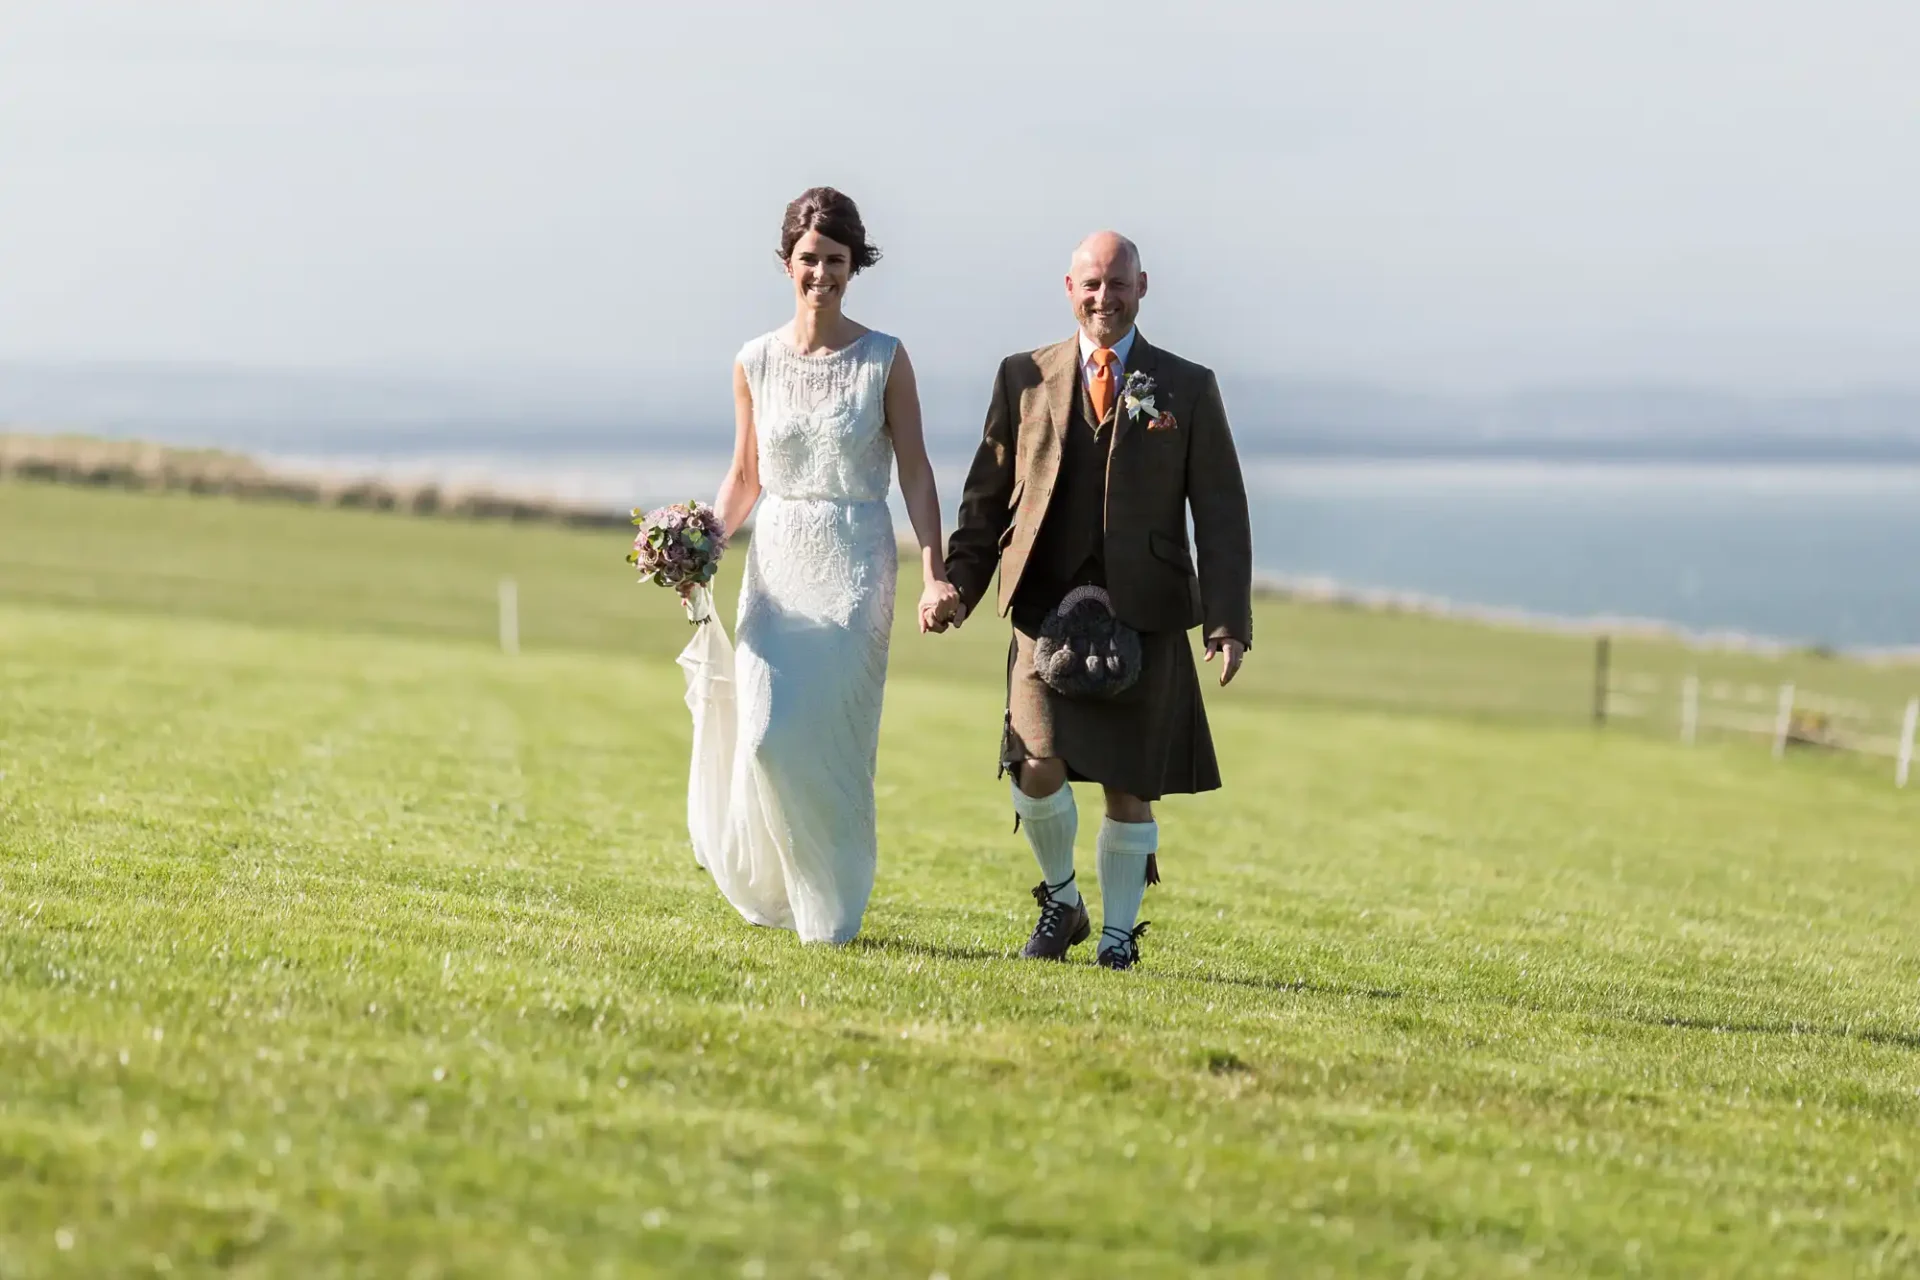 A bride in a white dress and a groom in a kilt walk hand in hand across a grassy field with a blue sea in the background.